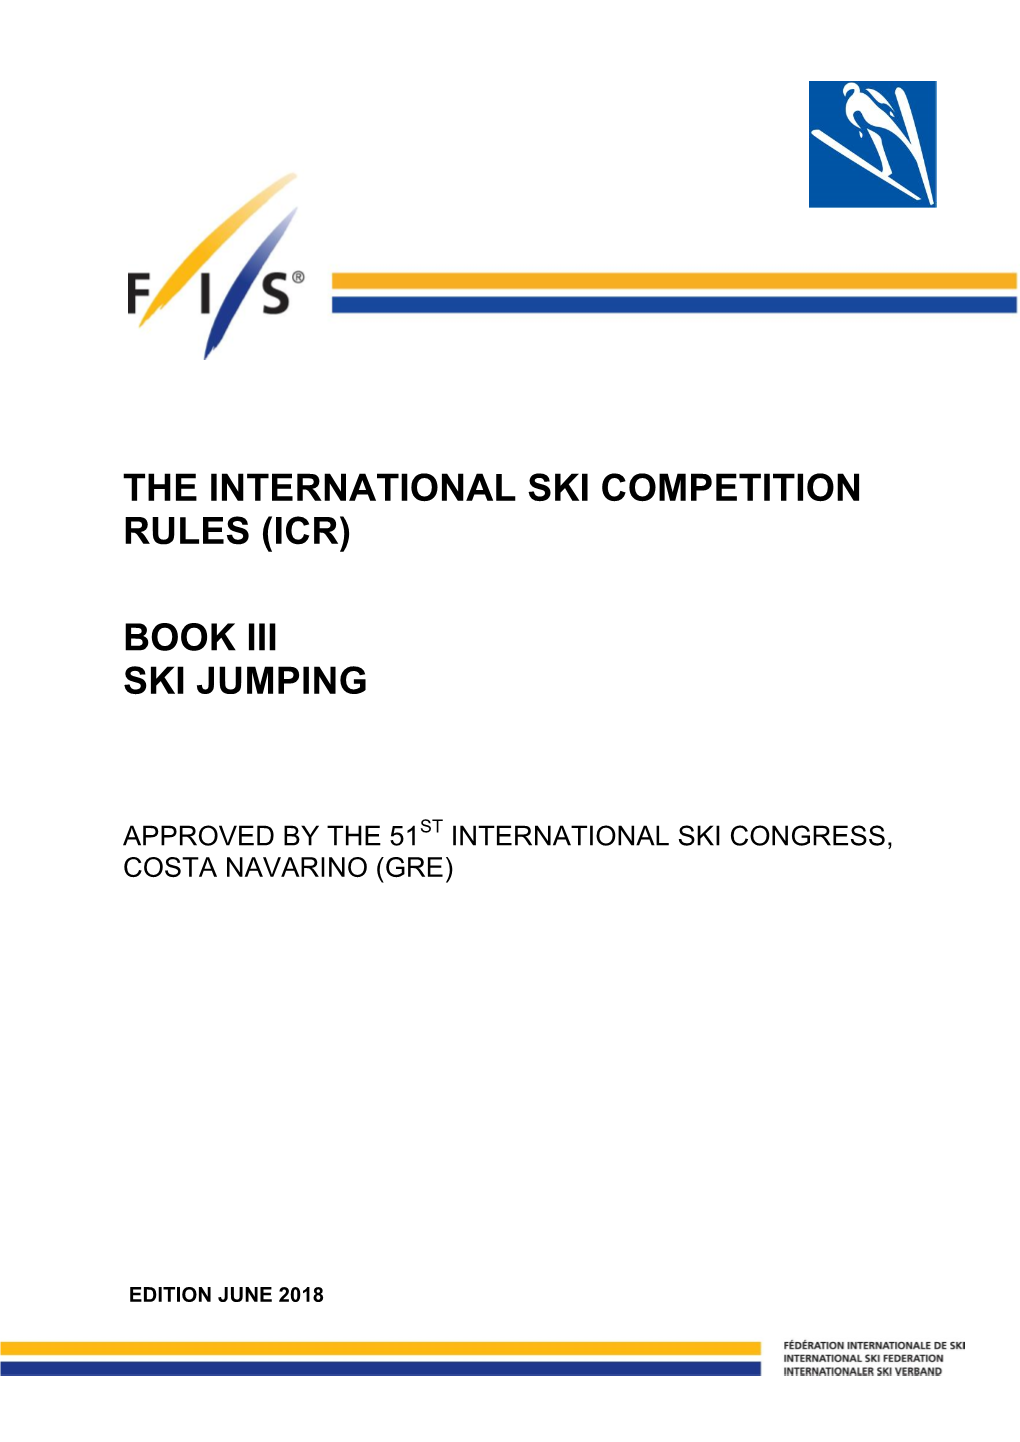 The International Ski Competition Rules (Icr) Book